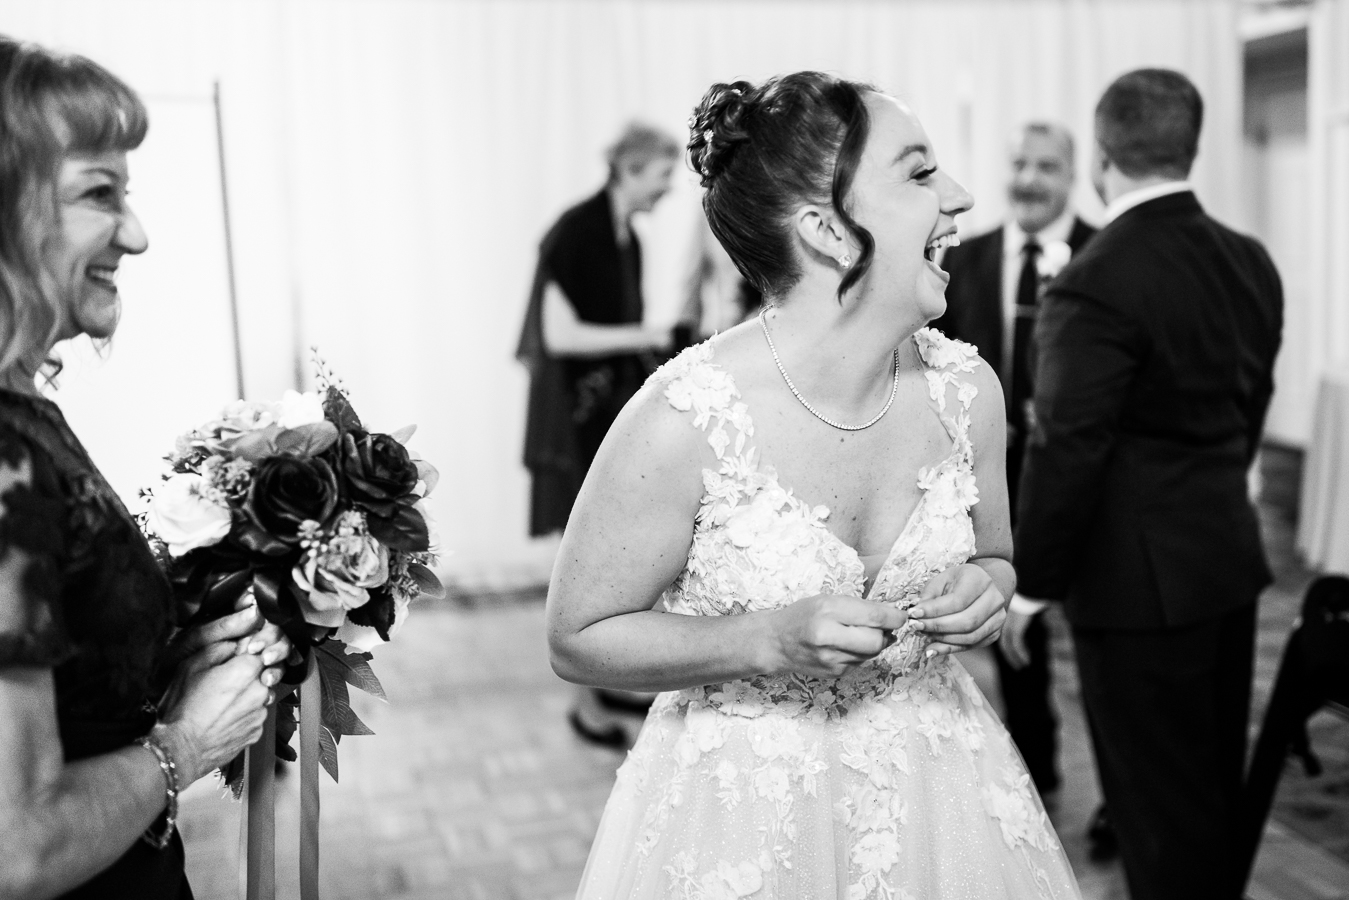 black and white candid moment of the bride as she smiles and laughs at guests captured by photojournalism photographer, lisa rhinehart